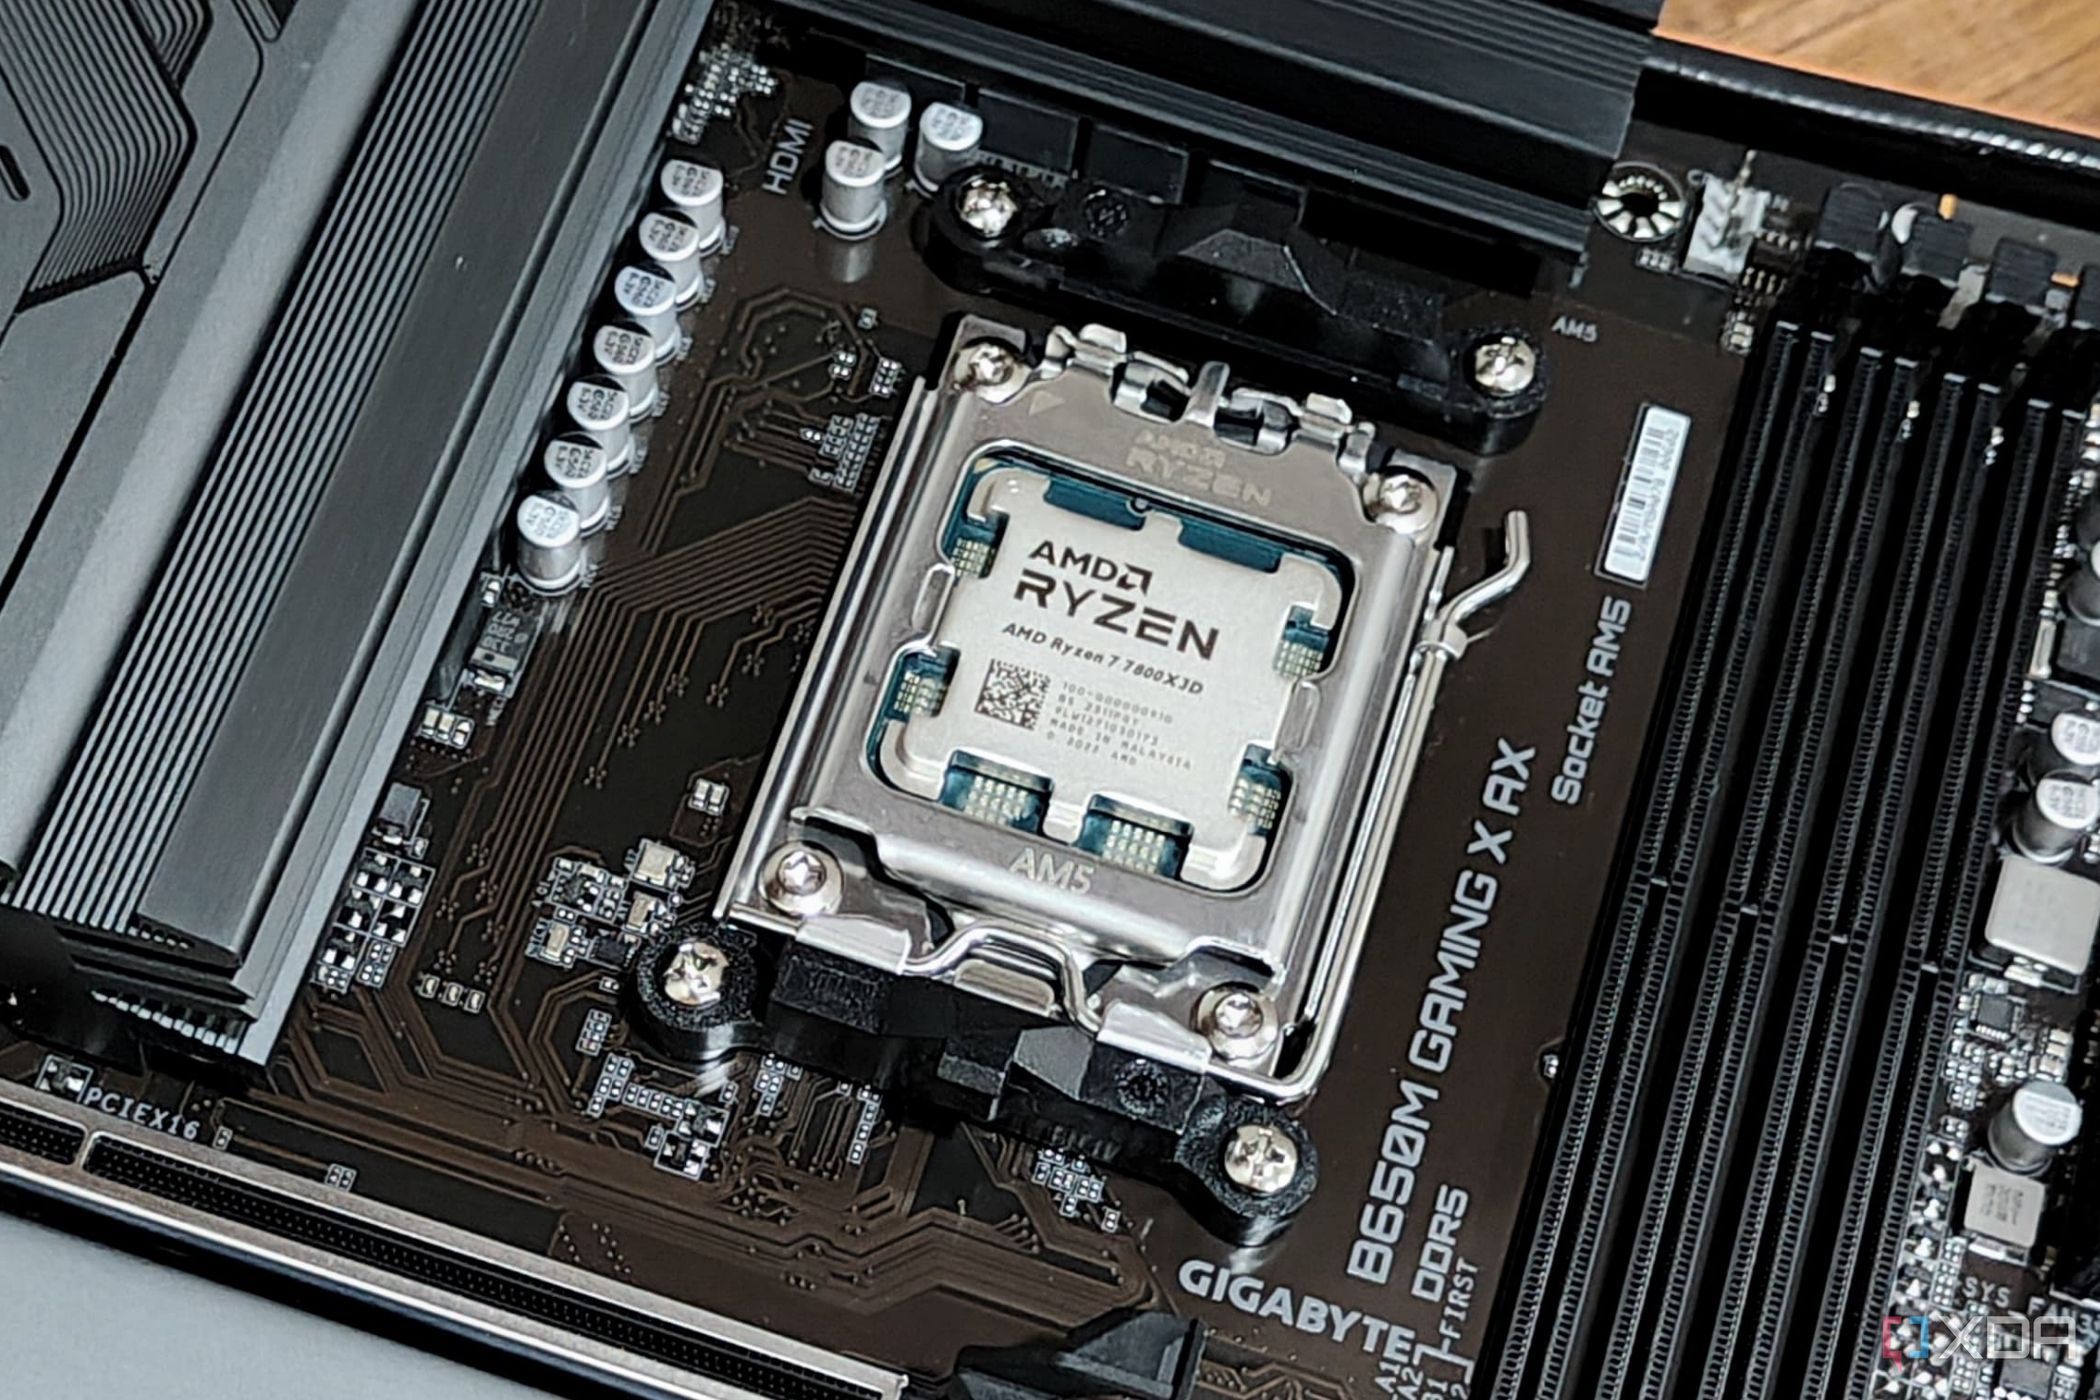 Image showing an AMD Ryzen 7 7800X3D CPU installed on a motherboard